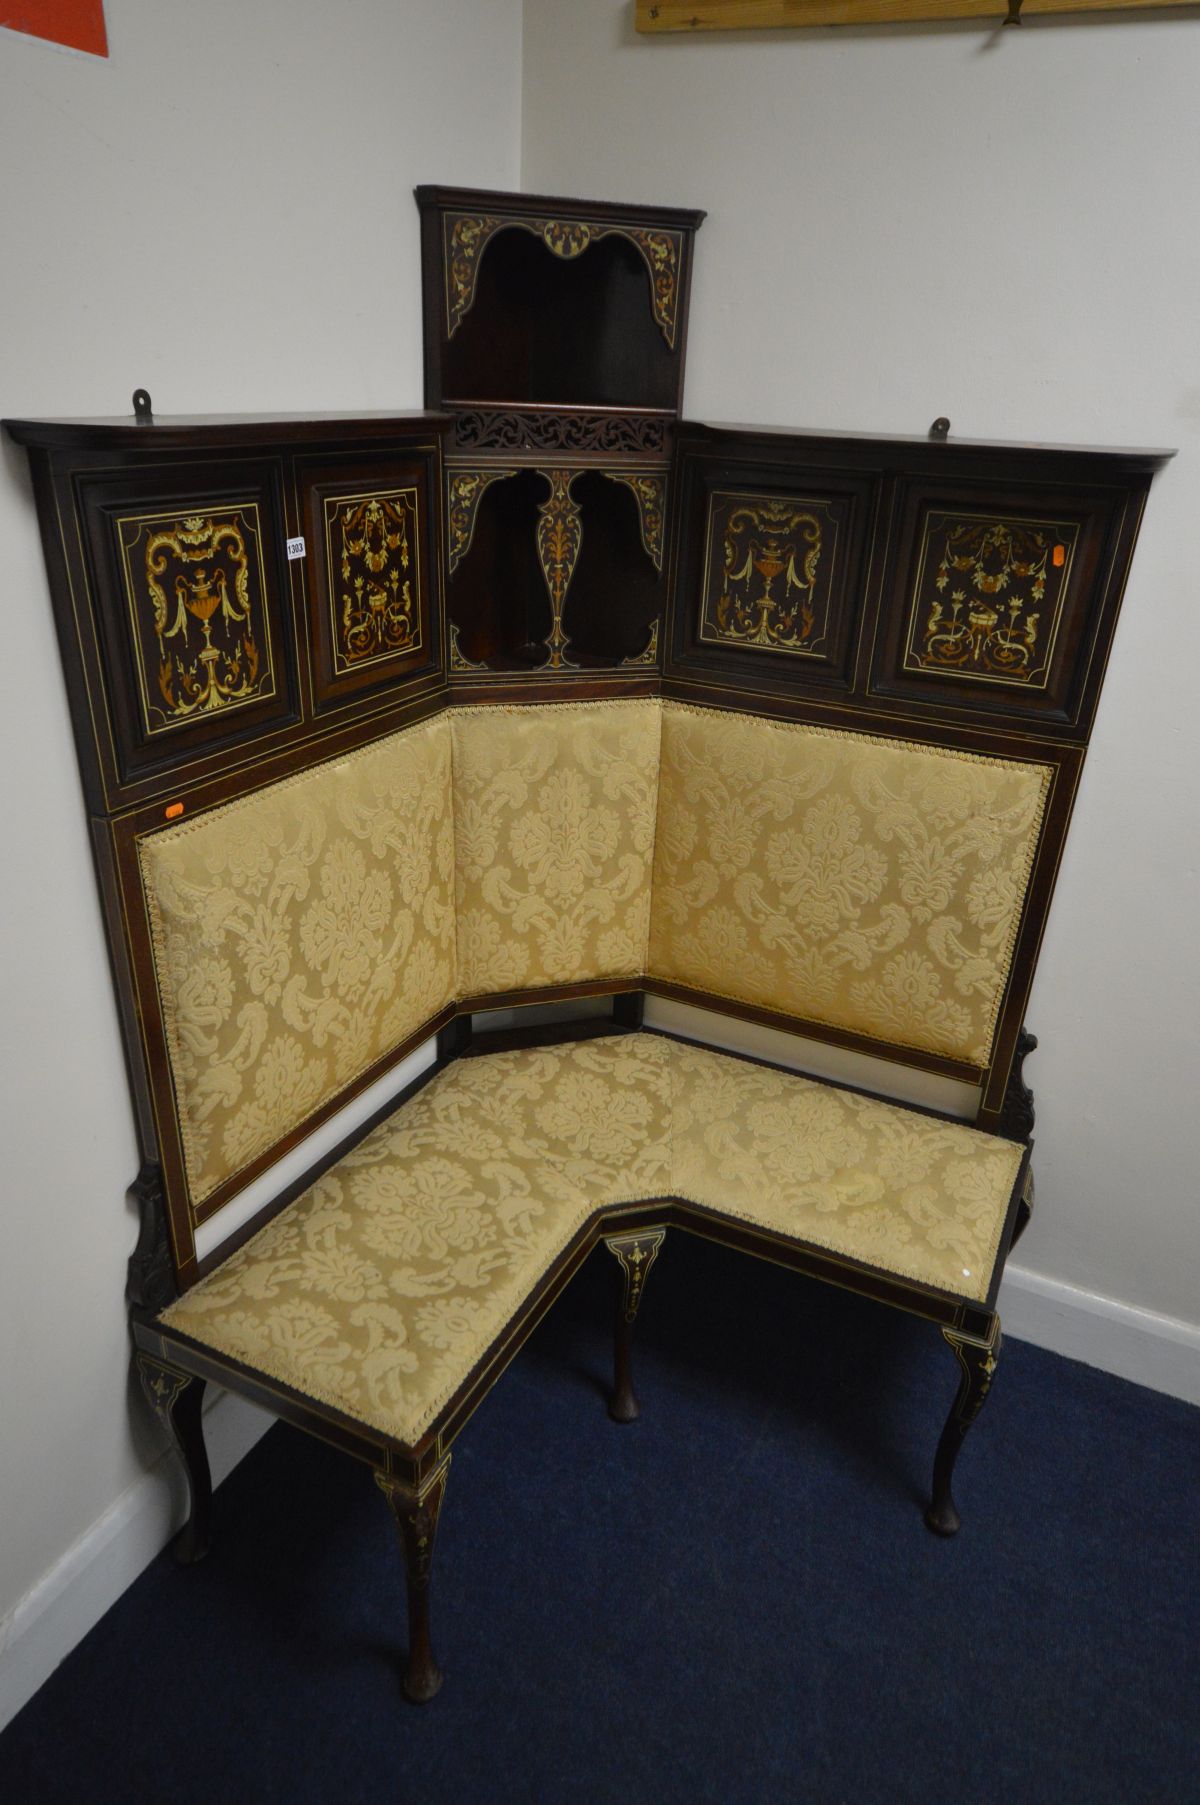 AN EDWARDIAN MAHOGANY AND MARQUETRY INLAID CORNER SOFA, the top section with four panels flanking